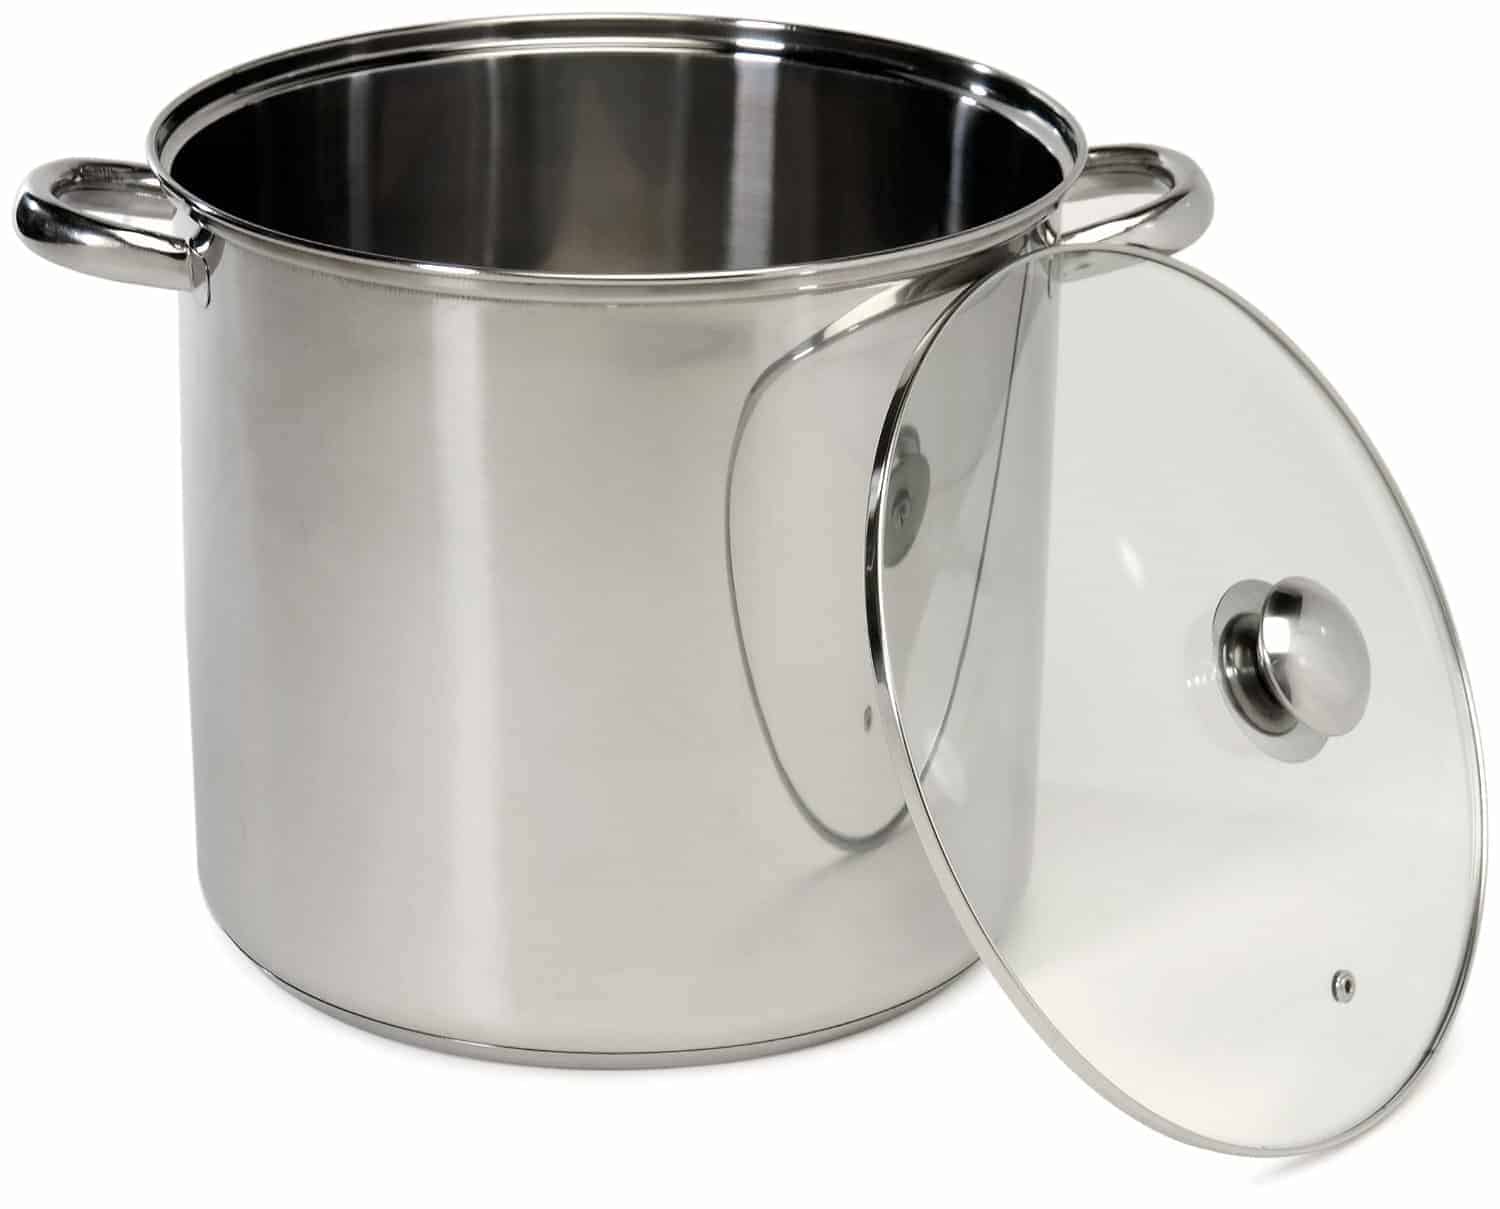 stockpot Essential Cookware You Need for the Holidays